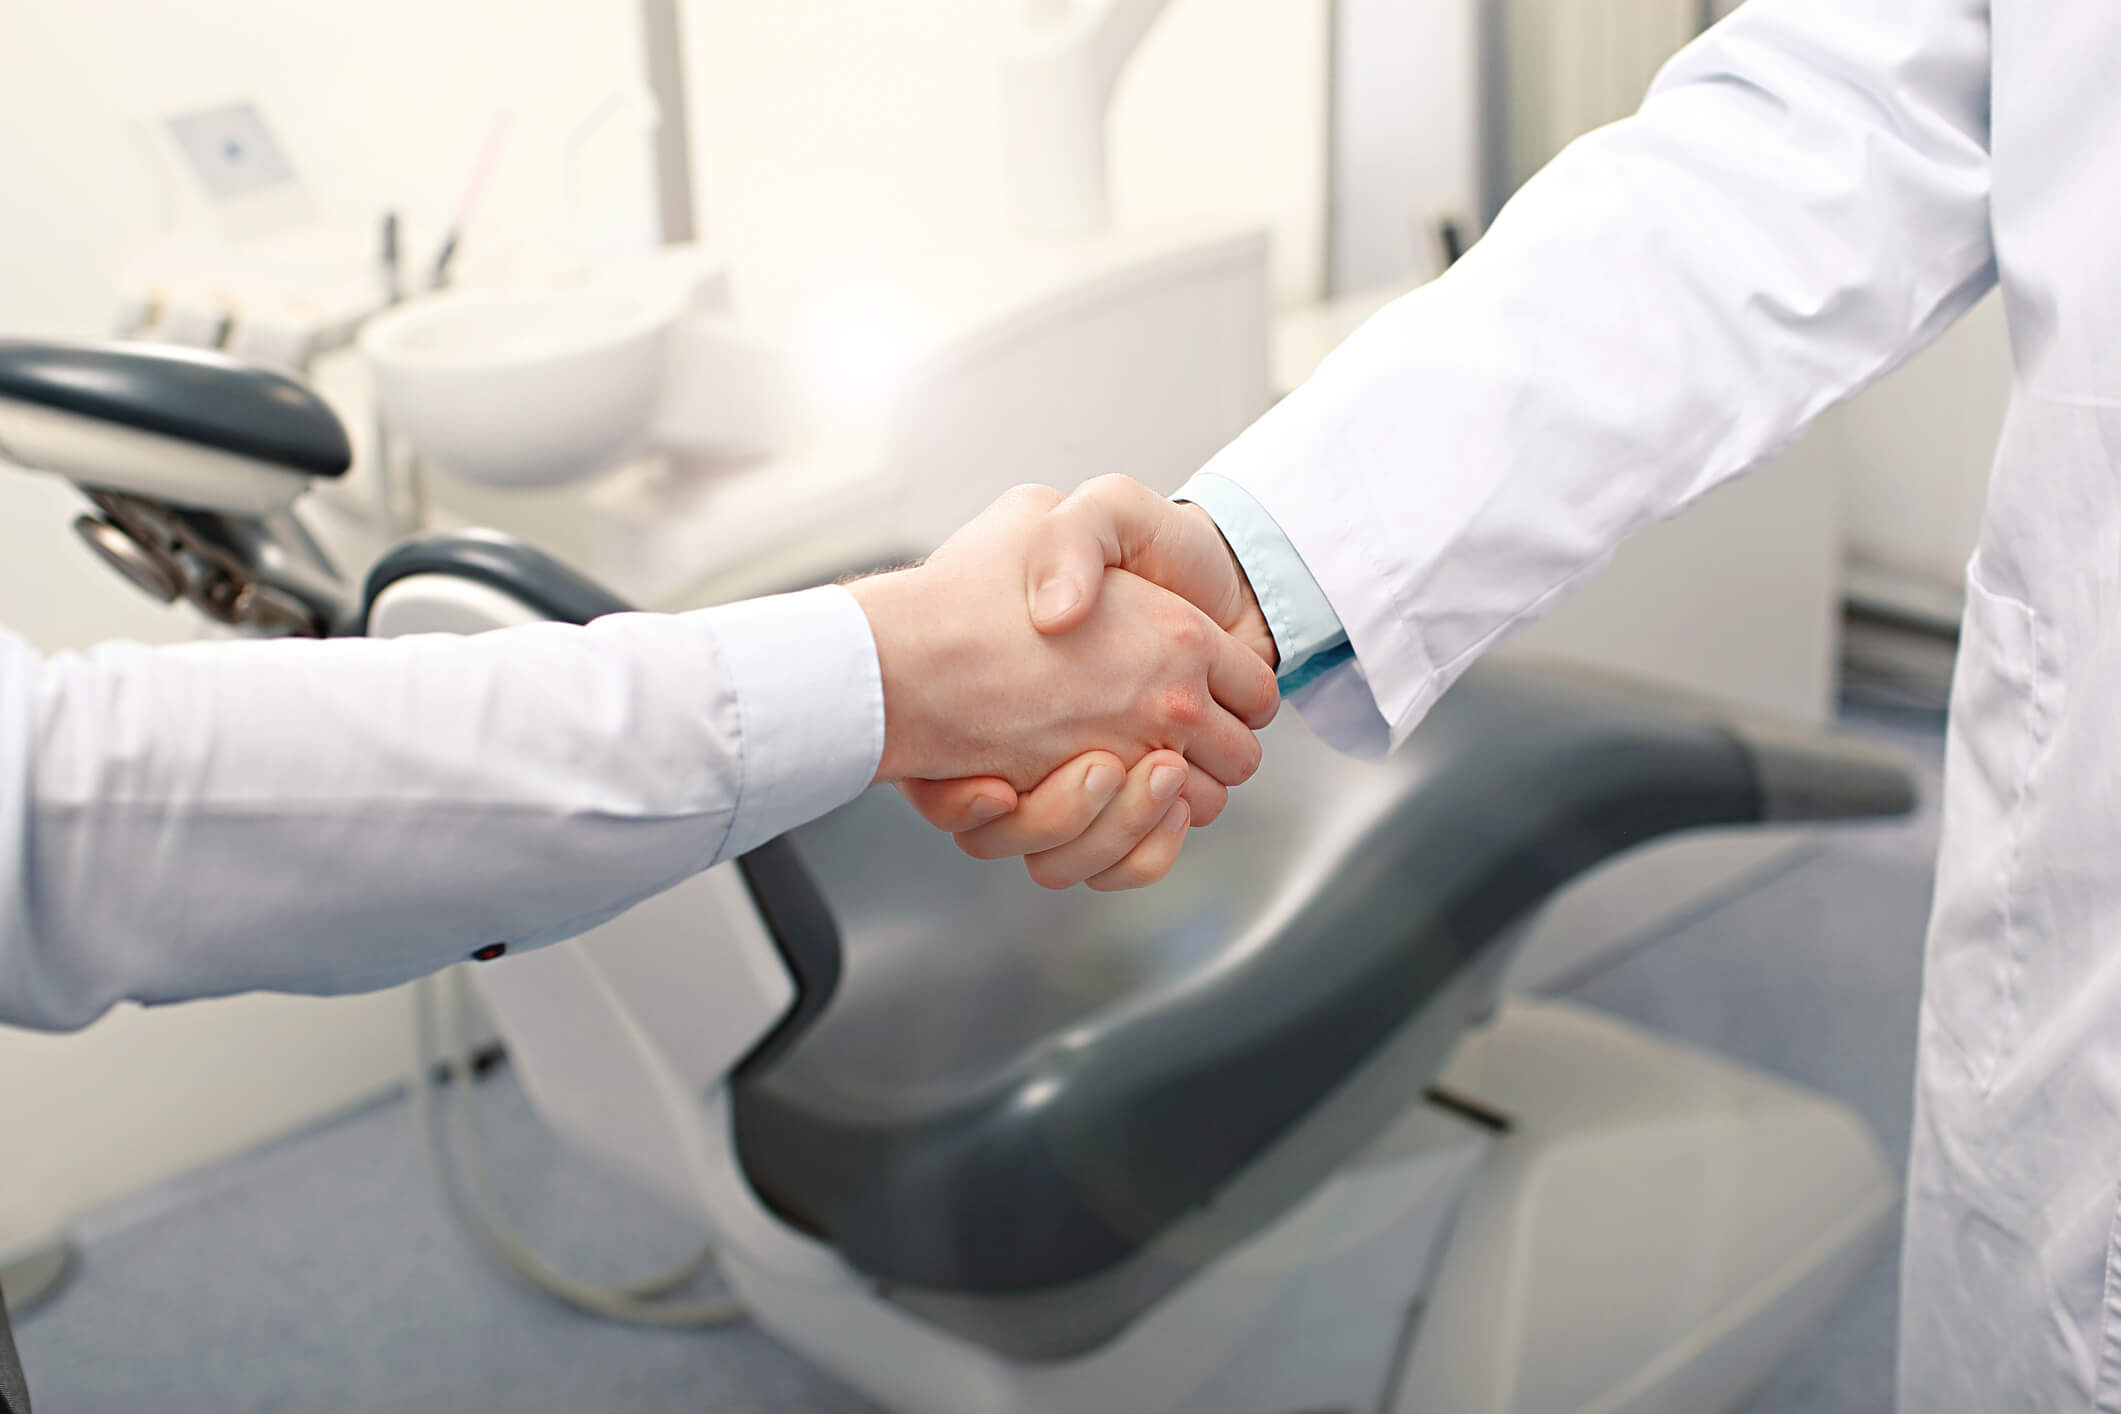 two people in white coats shaking hands